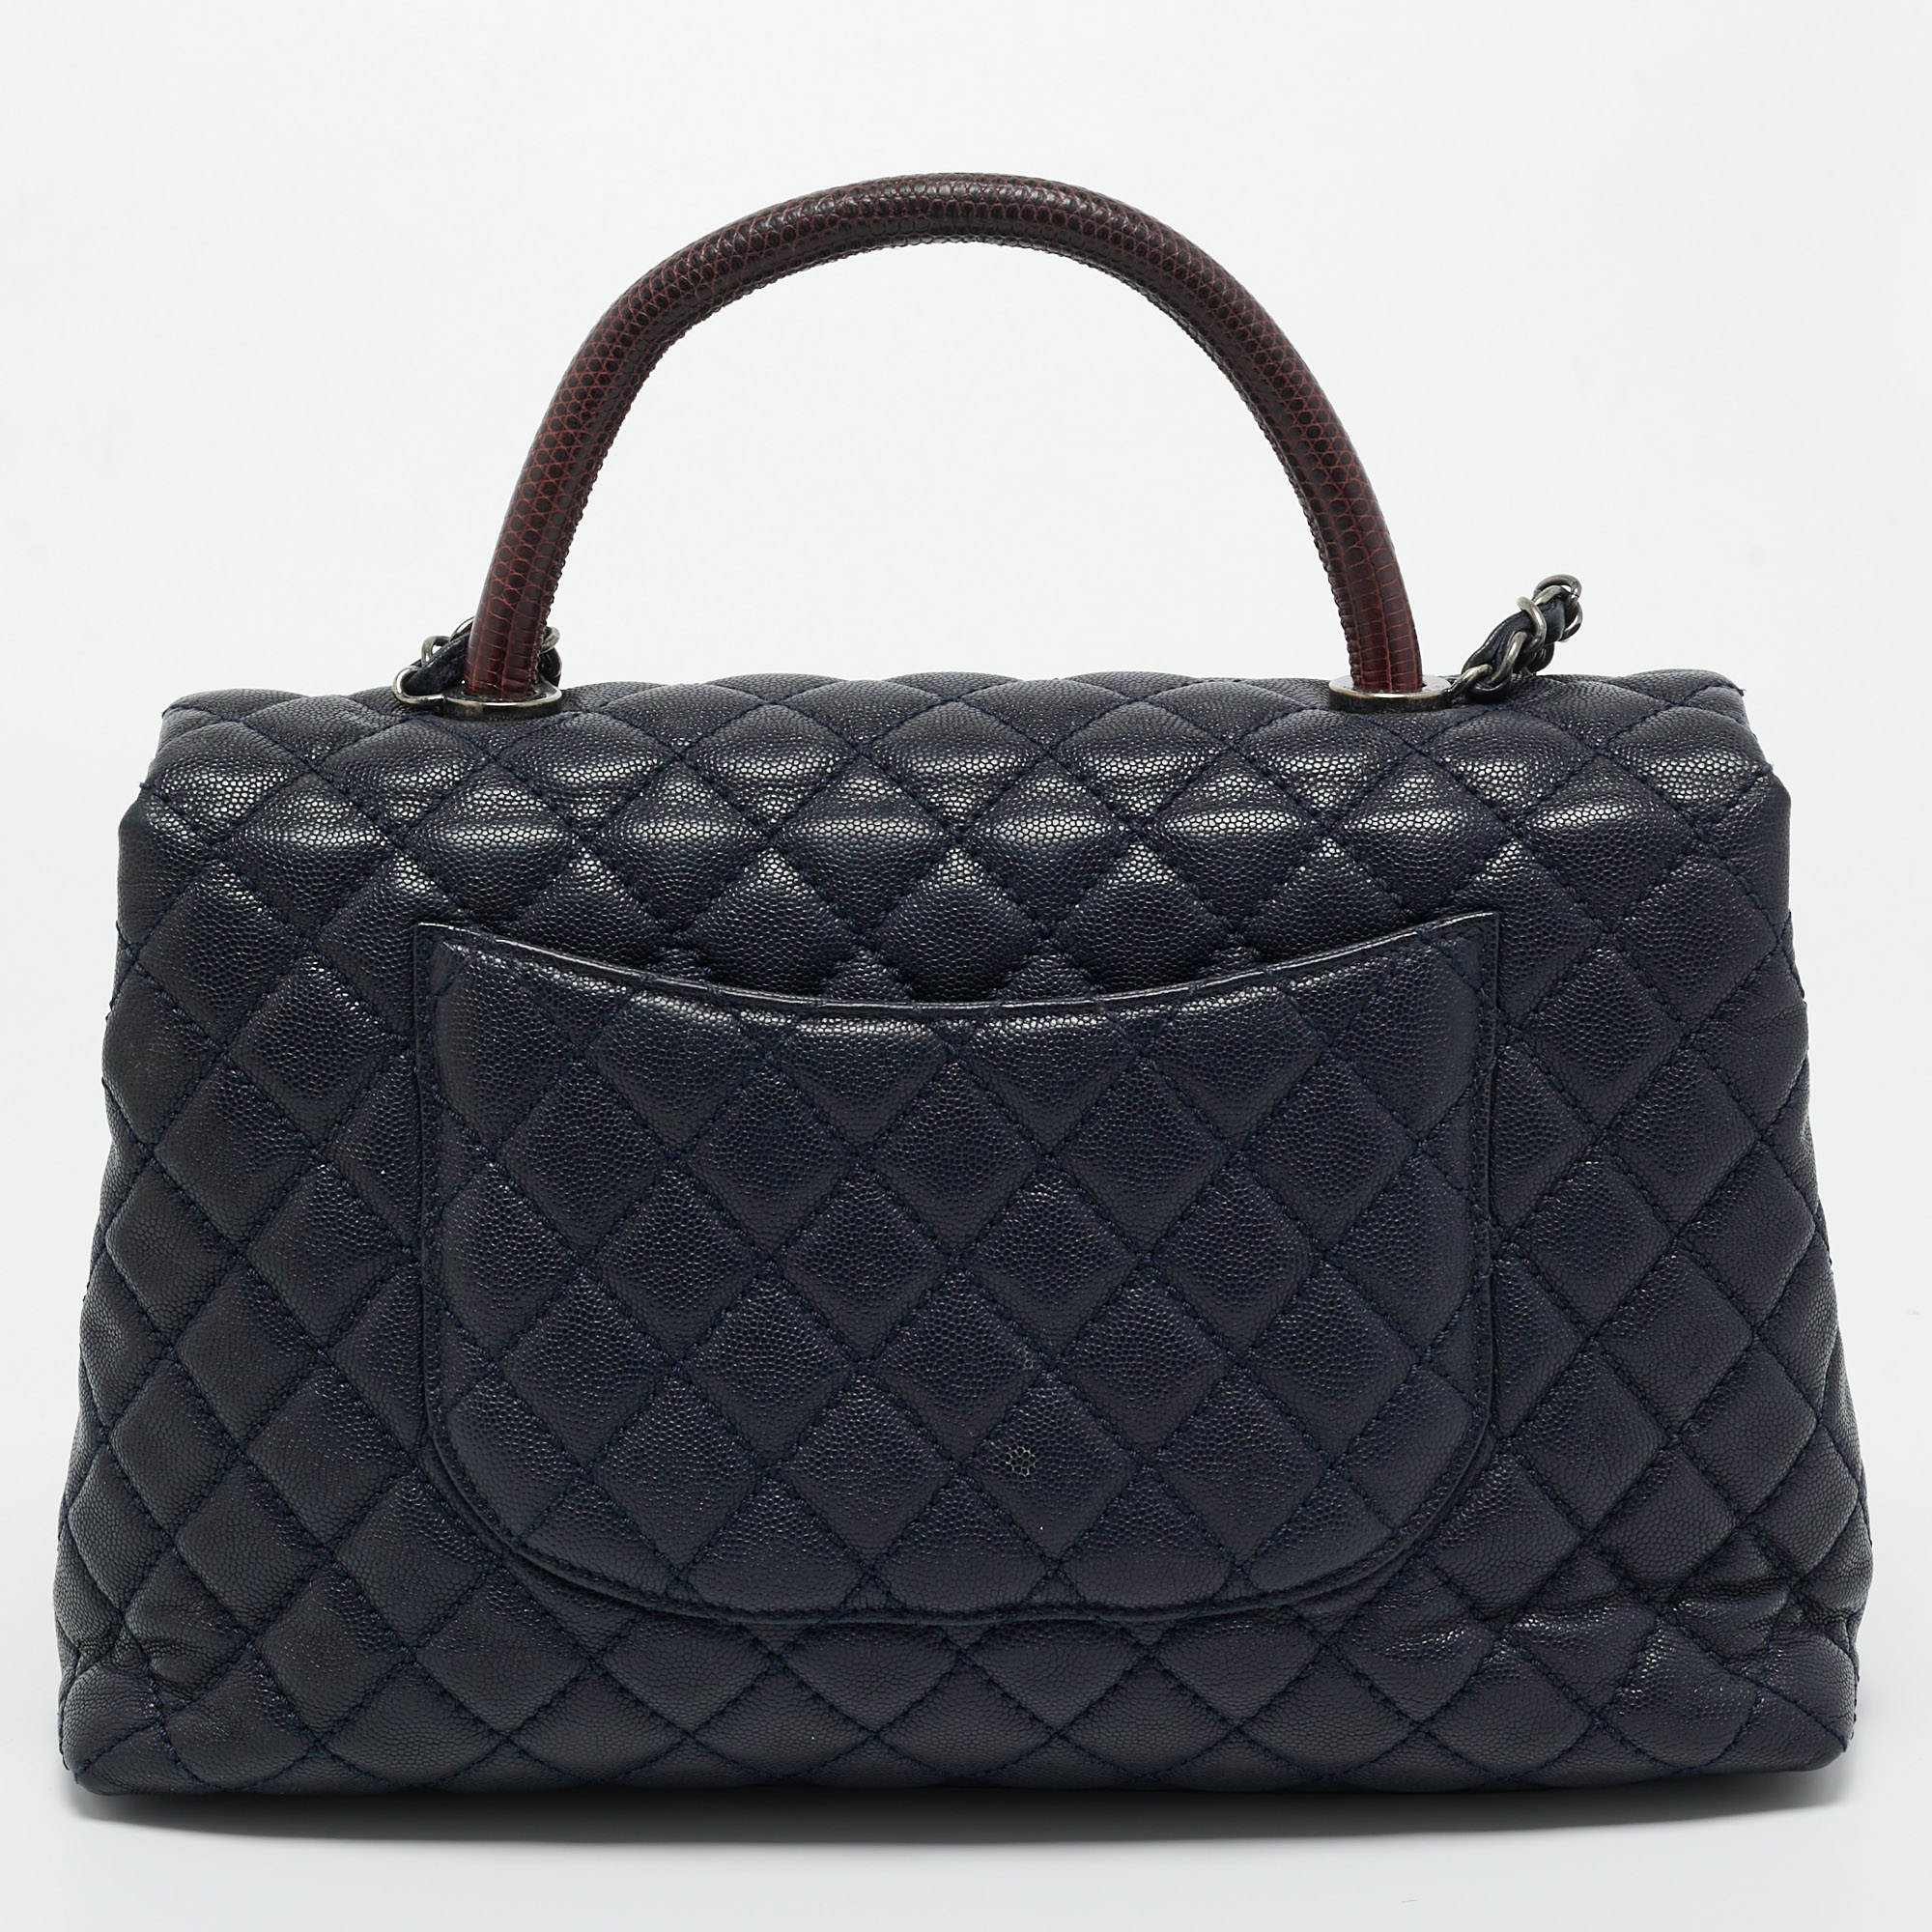 Chanel Dark Blue/Burgundy Quilted Caviar Leather And Lizard Large Coco Top Handle Bag